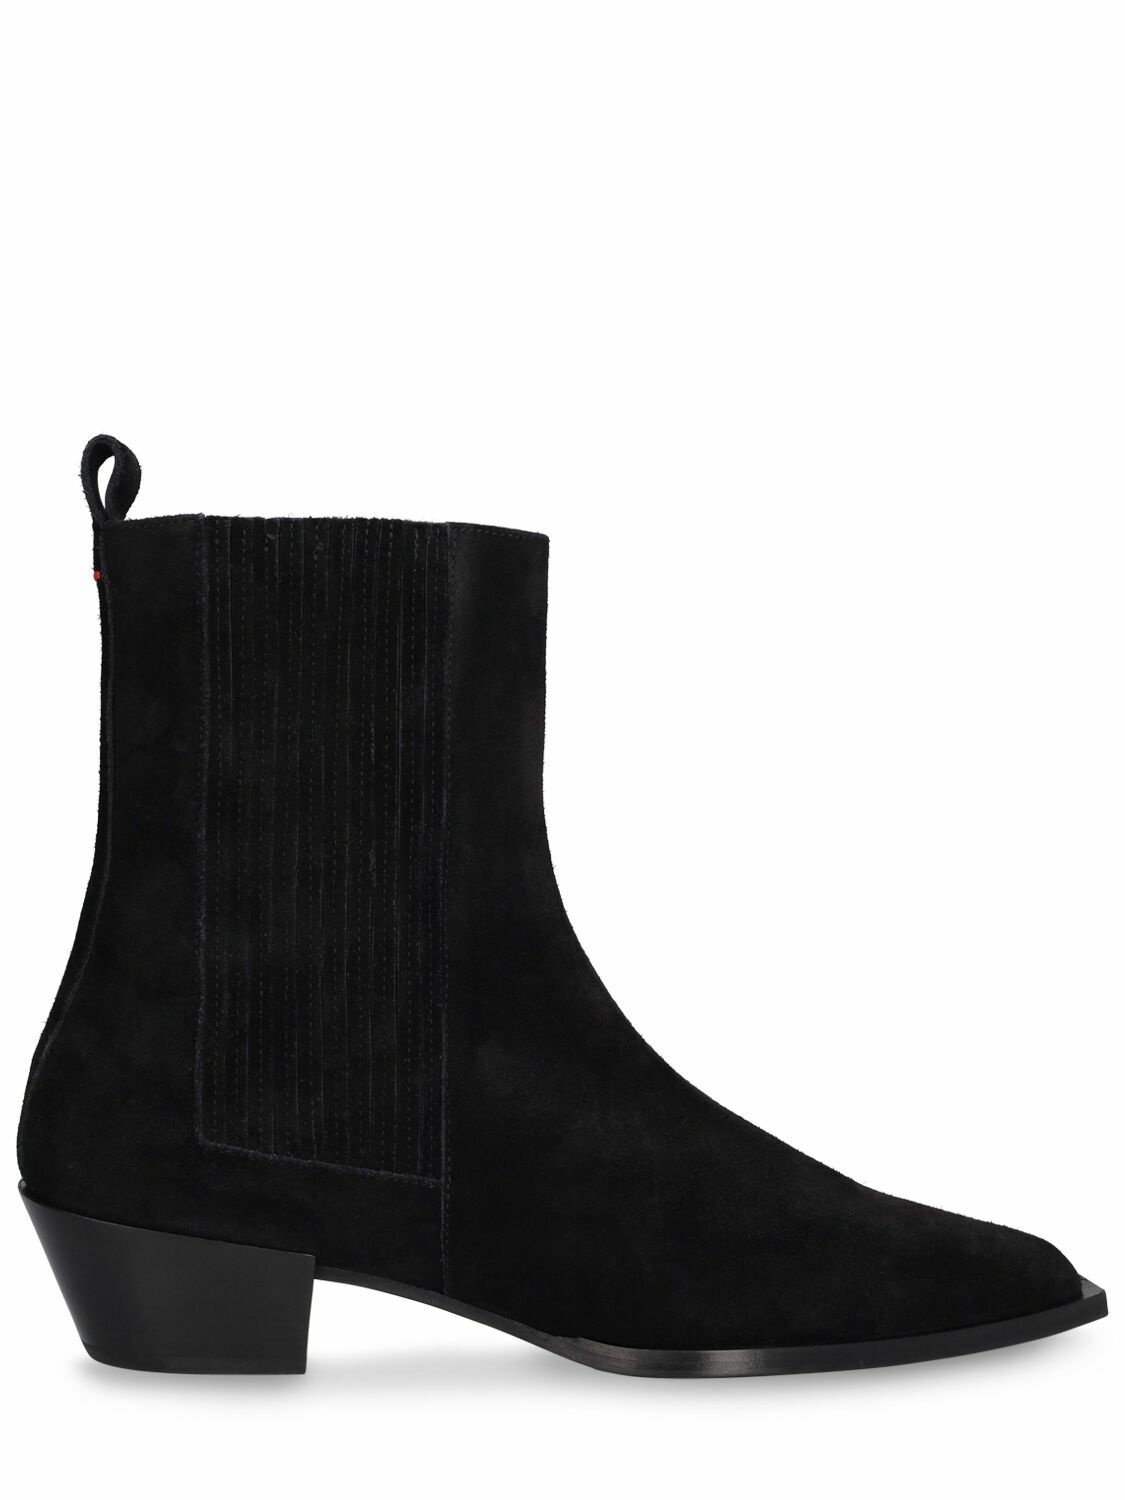 Photo: AEYDE - 40mm Belinda Suede Ankle Boots